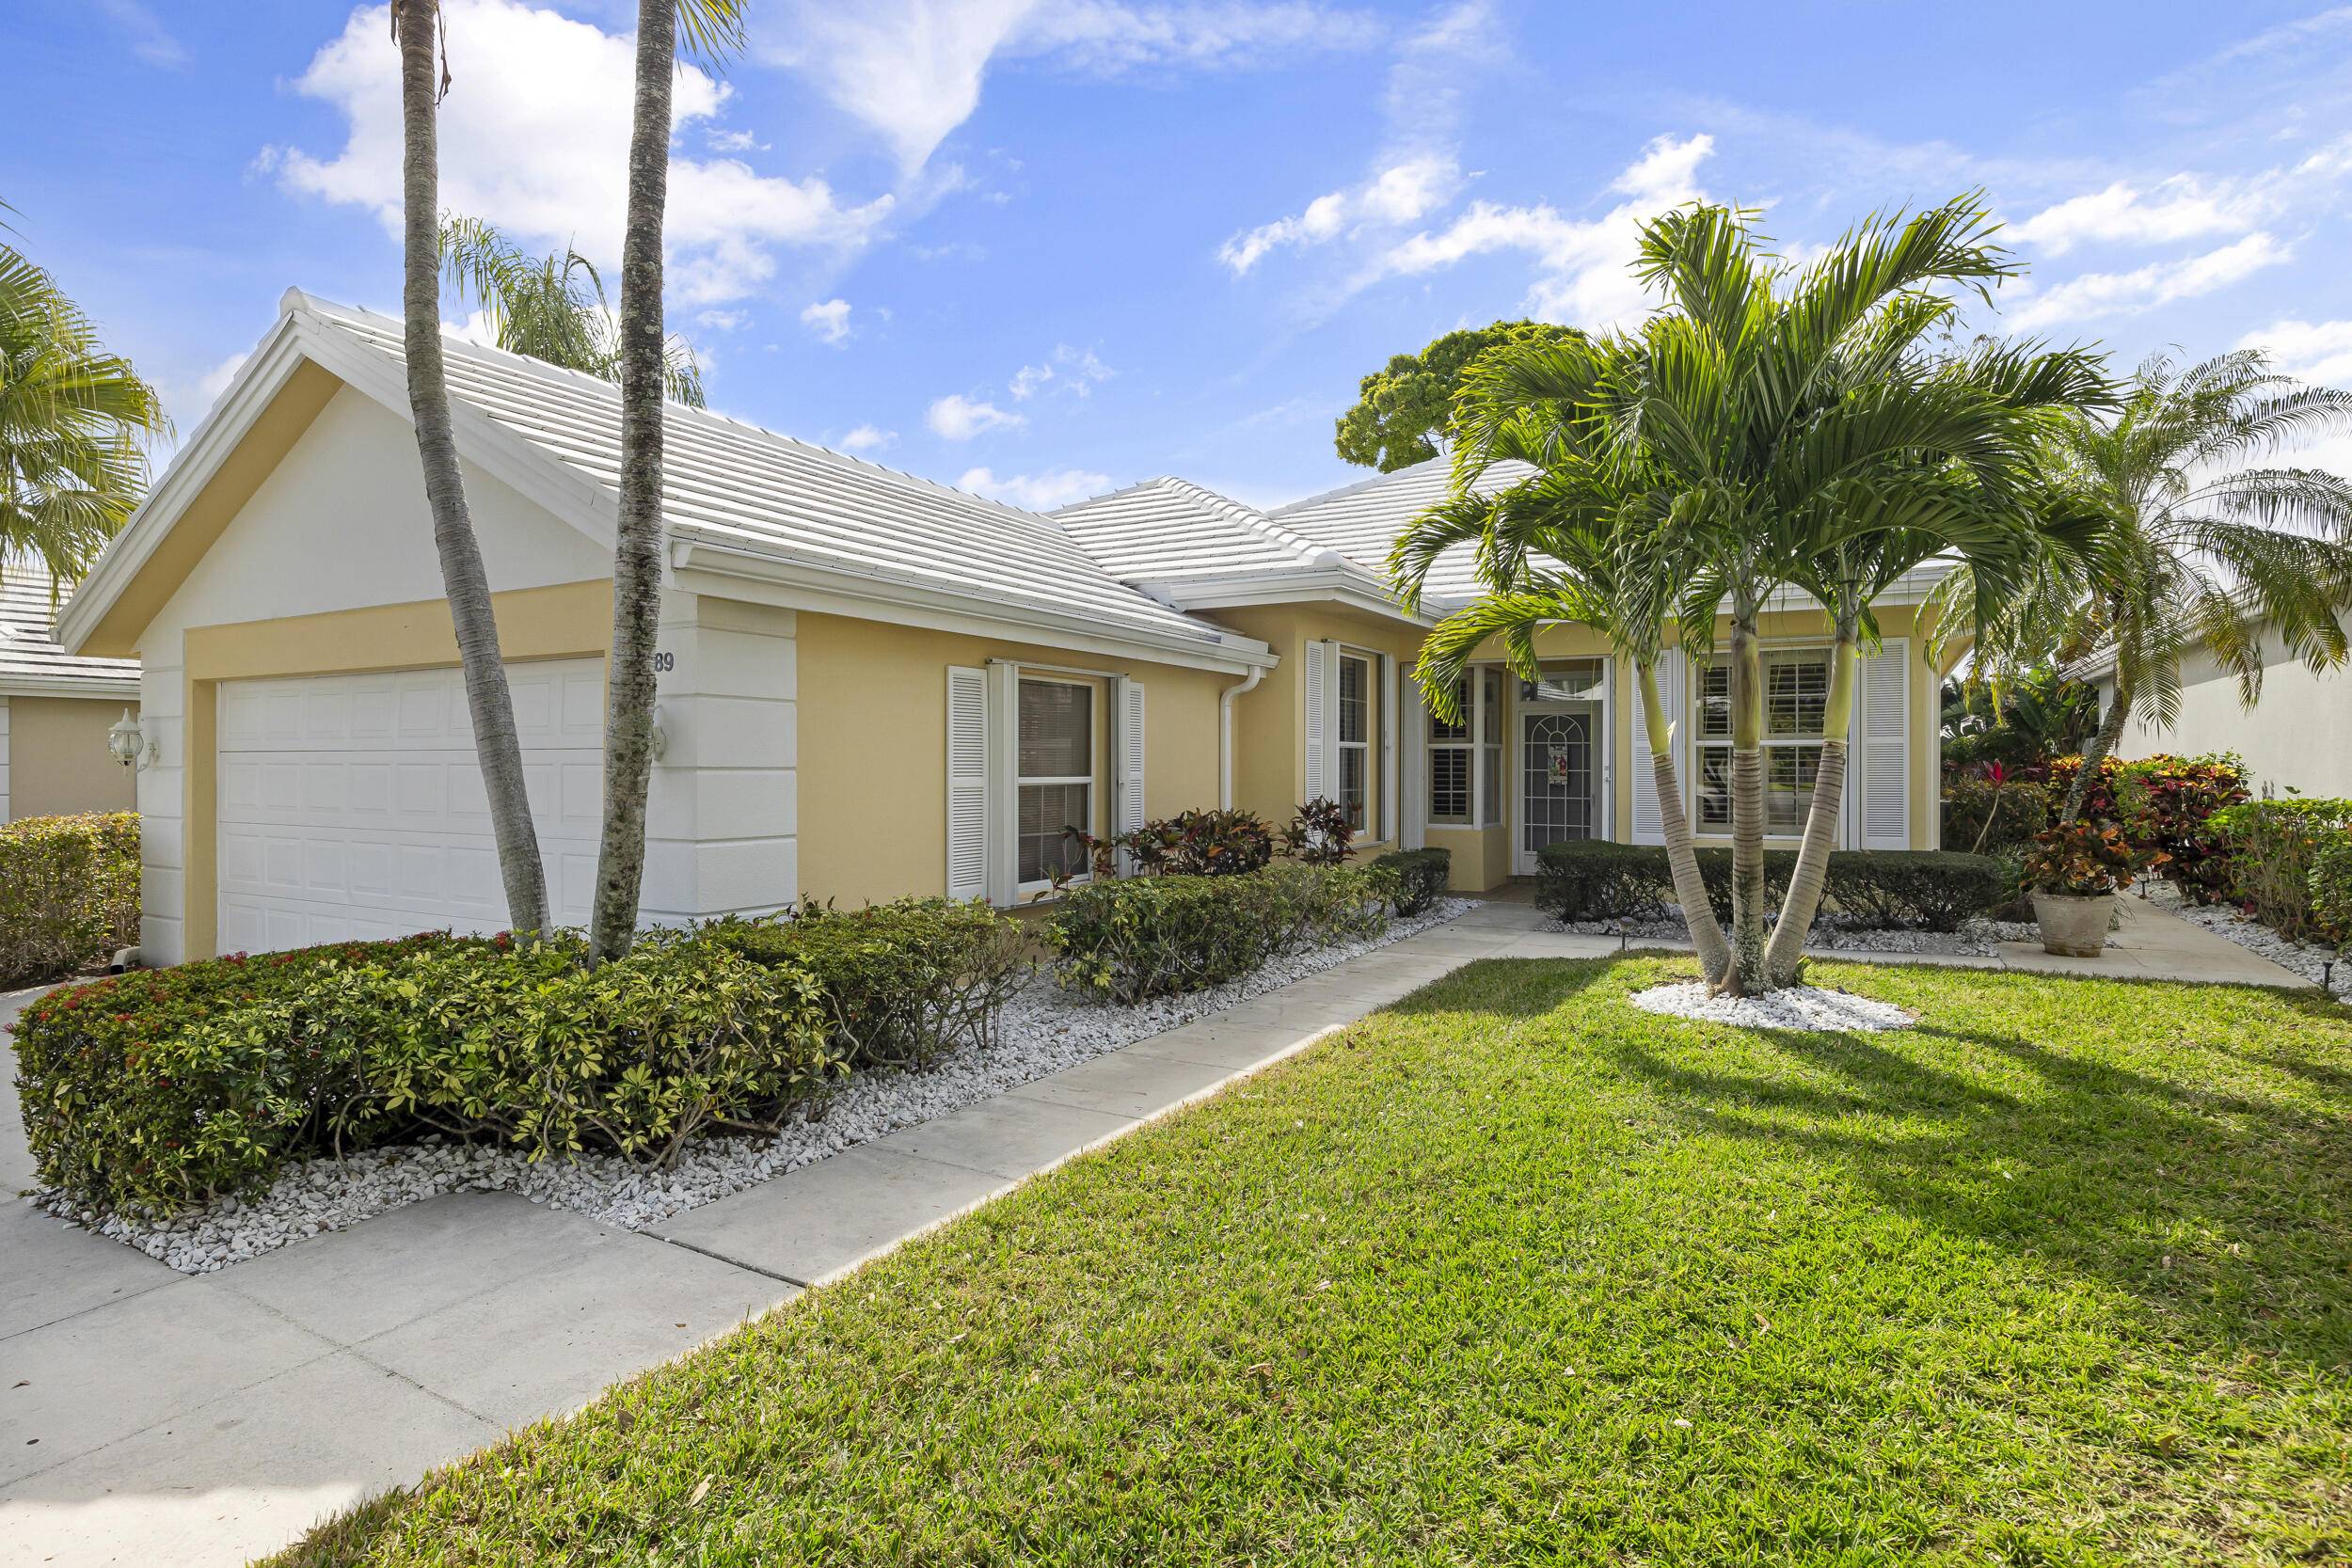 Welcome to Garden Oaks, a gated community conveniently located in Palm Beach Gardens.